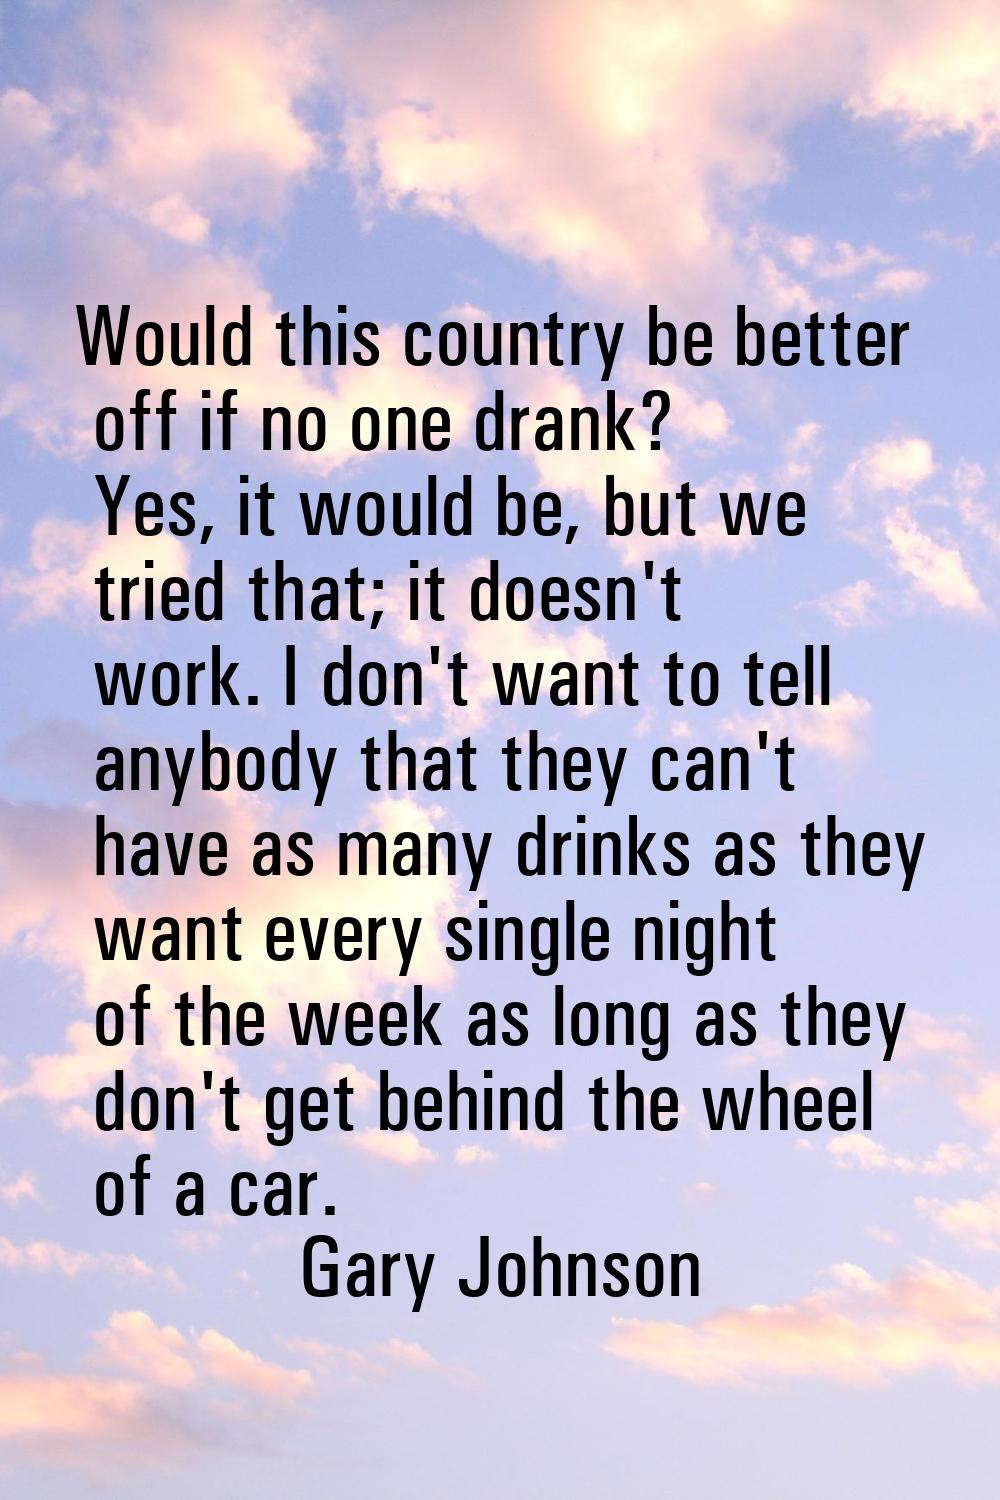 Would this country be better off if no one drank? Yes, it would be, but we tried that; it doesn't w